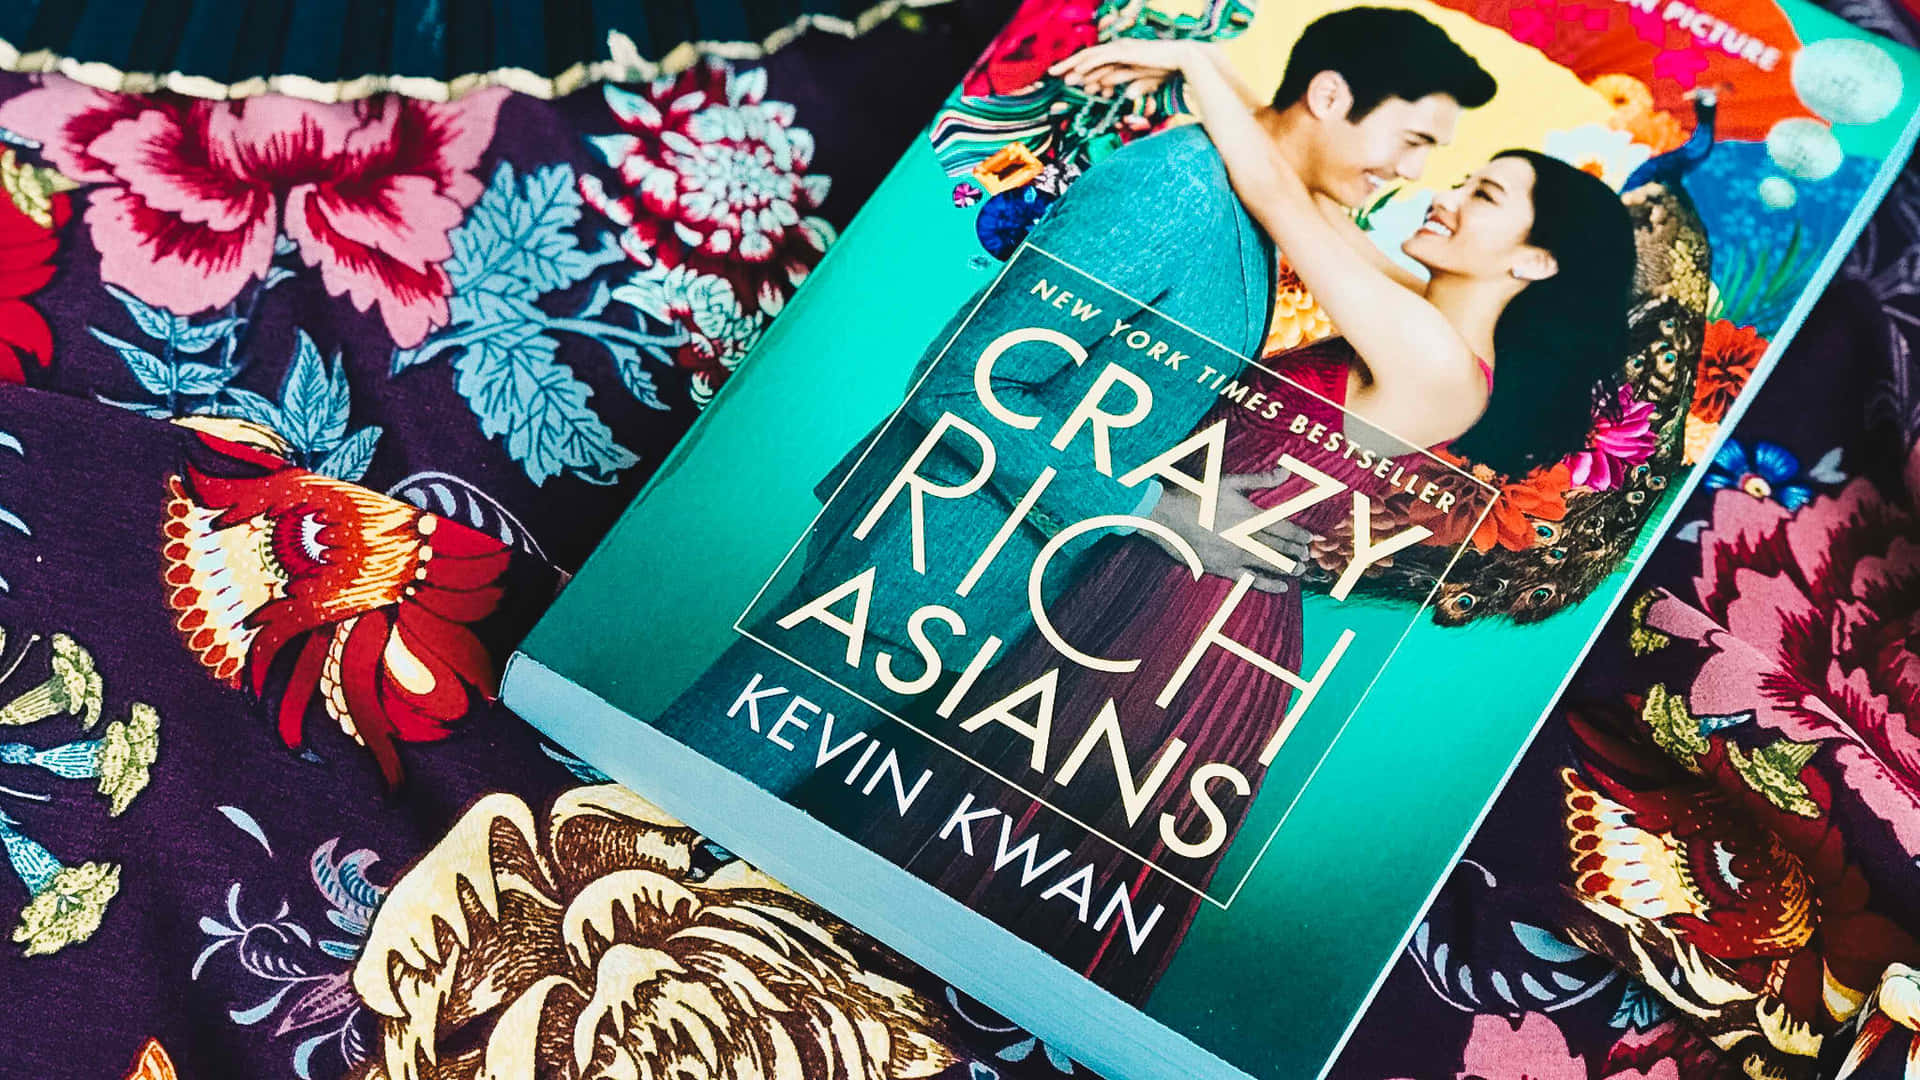 The blockbuster hit, Crazy Rich Asians, premiered in 2018 and quickly became a cultural phenomenon